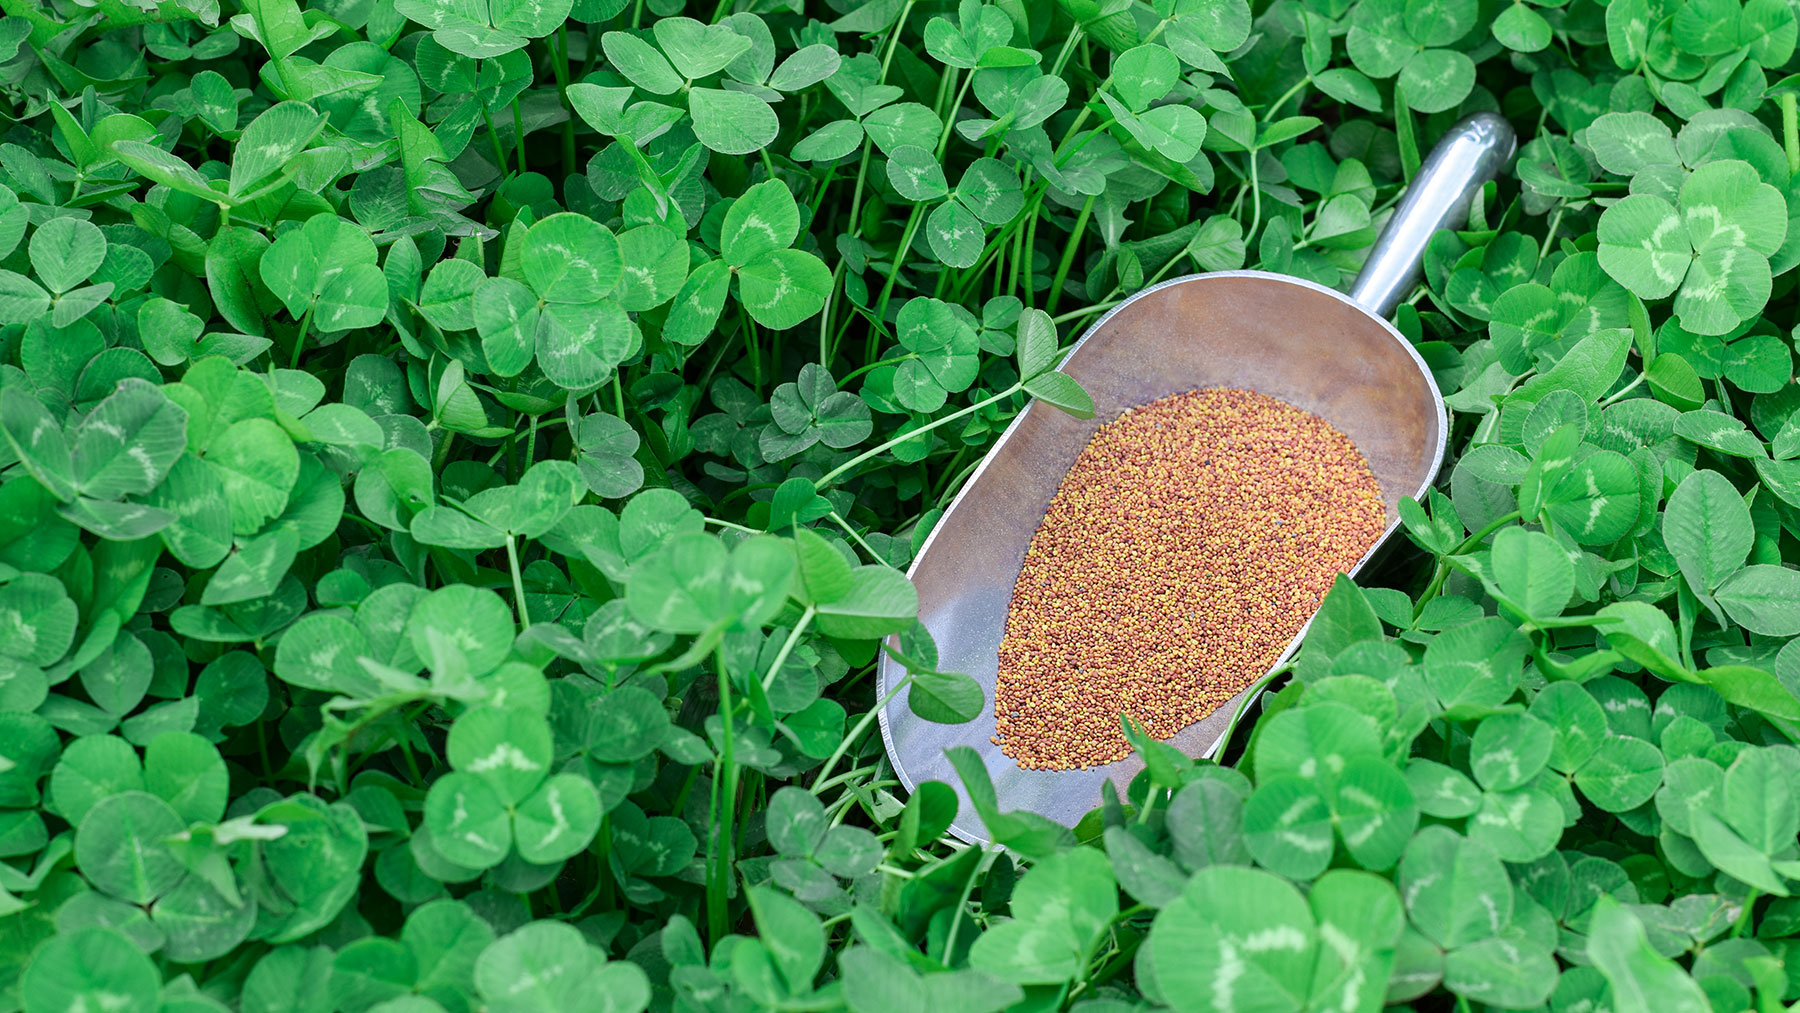 Green clover lawn with seeds in seed scoop